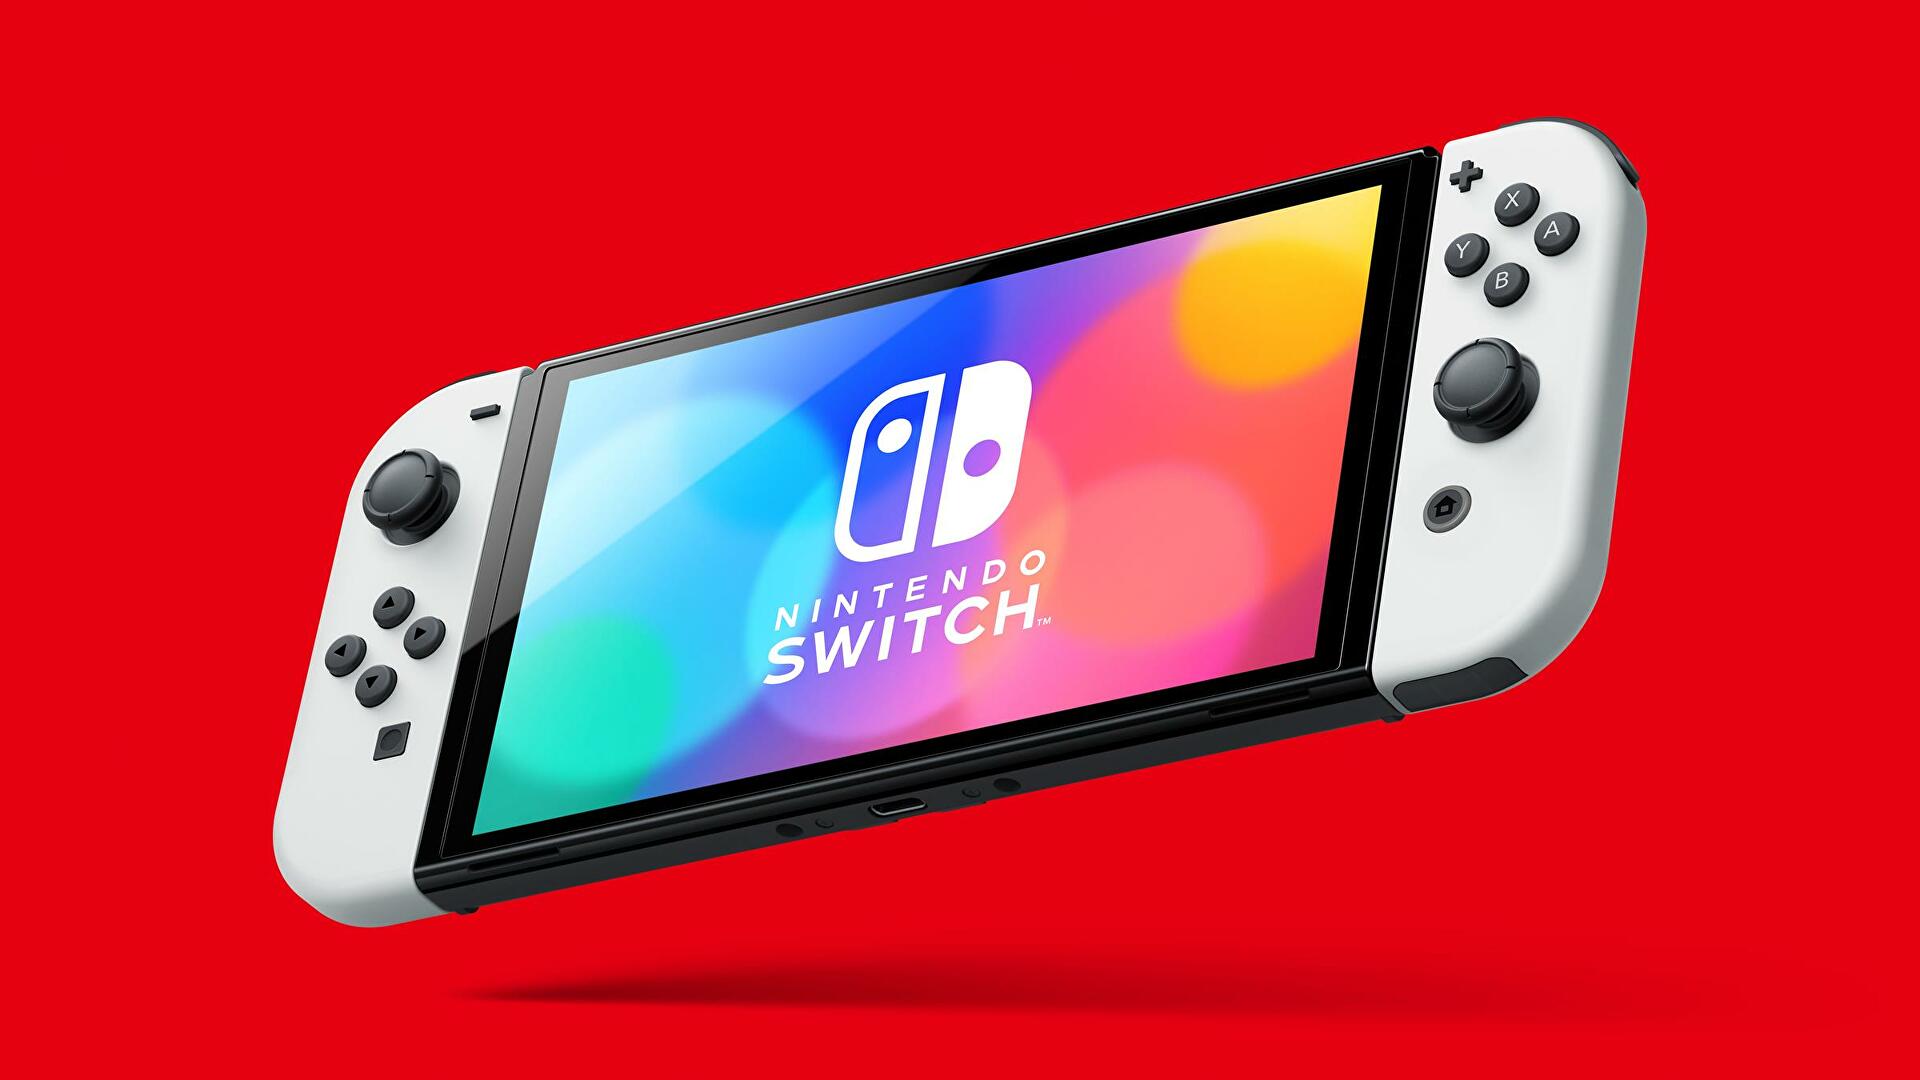 Switch is Nintendo’s best-selling home console with over 114 million units sold lifetime